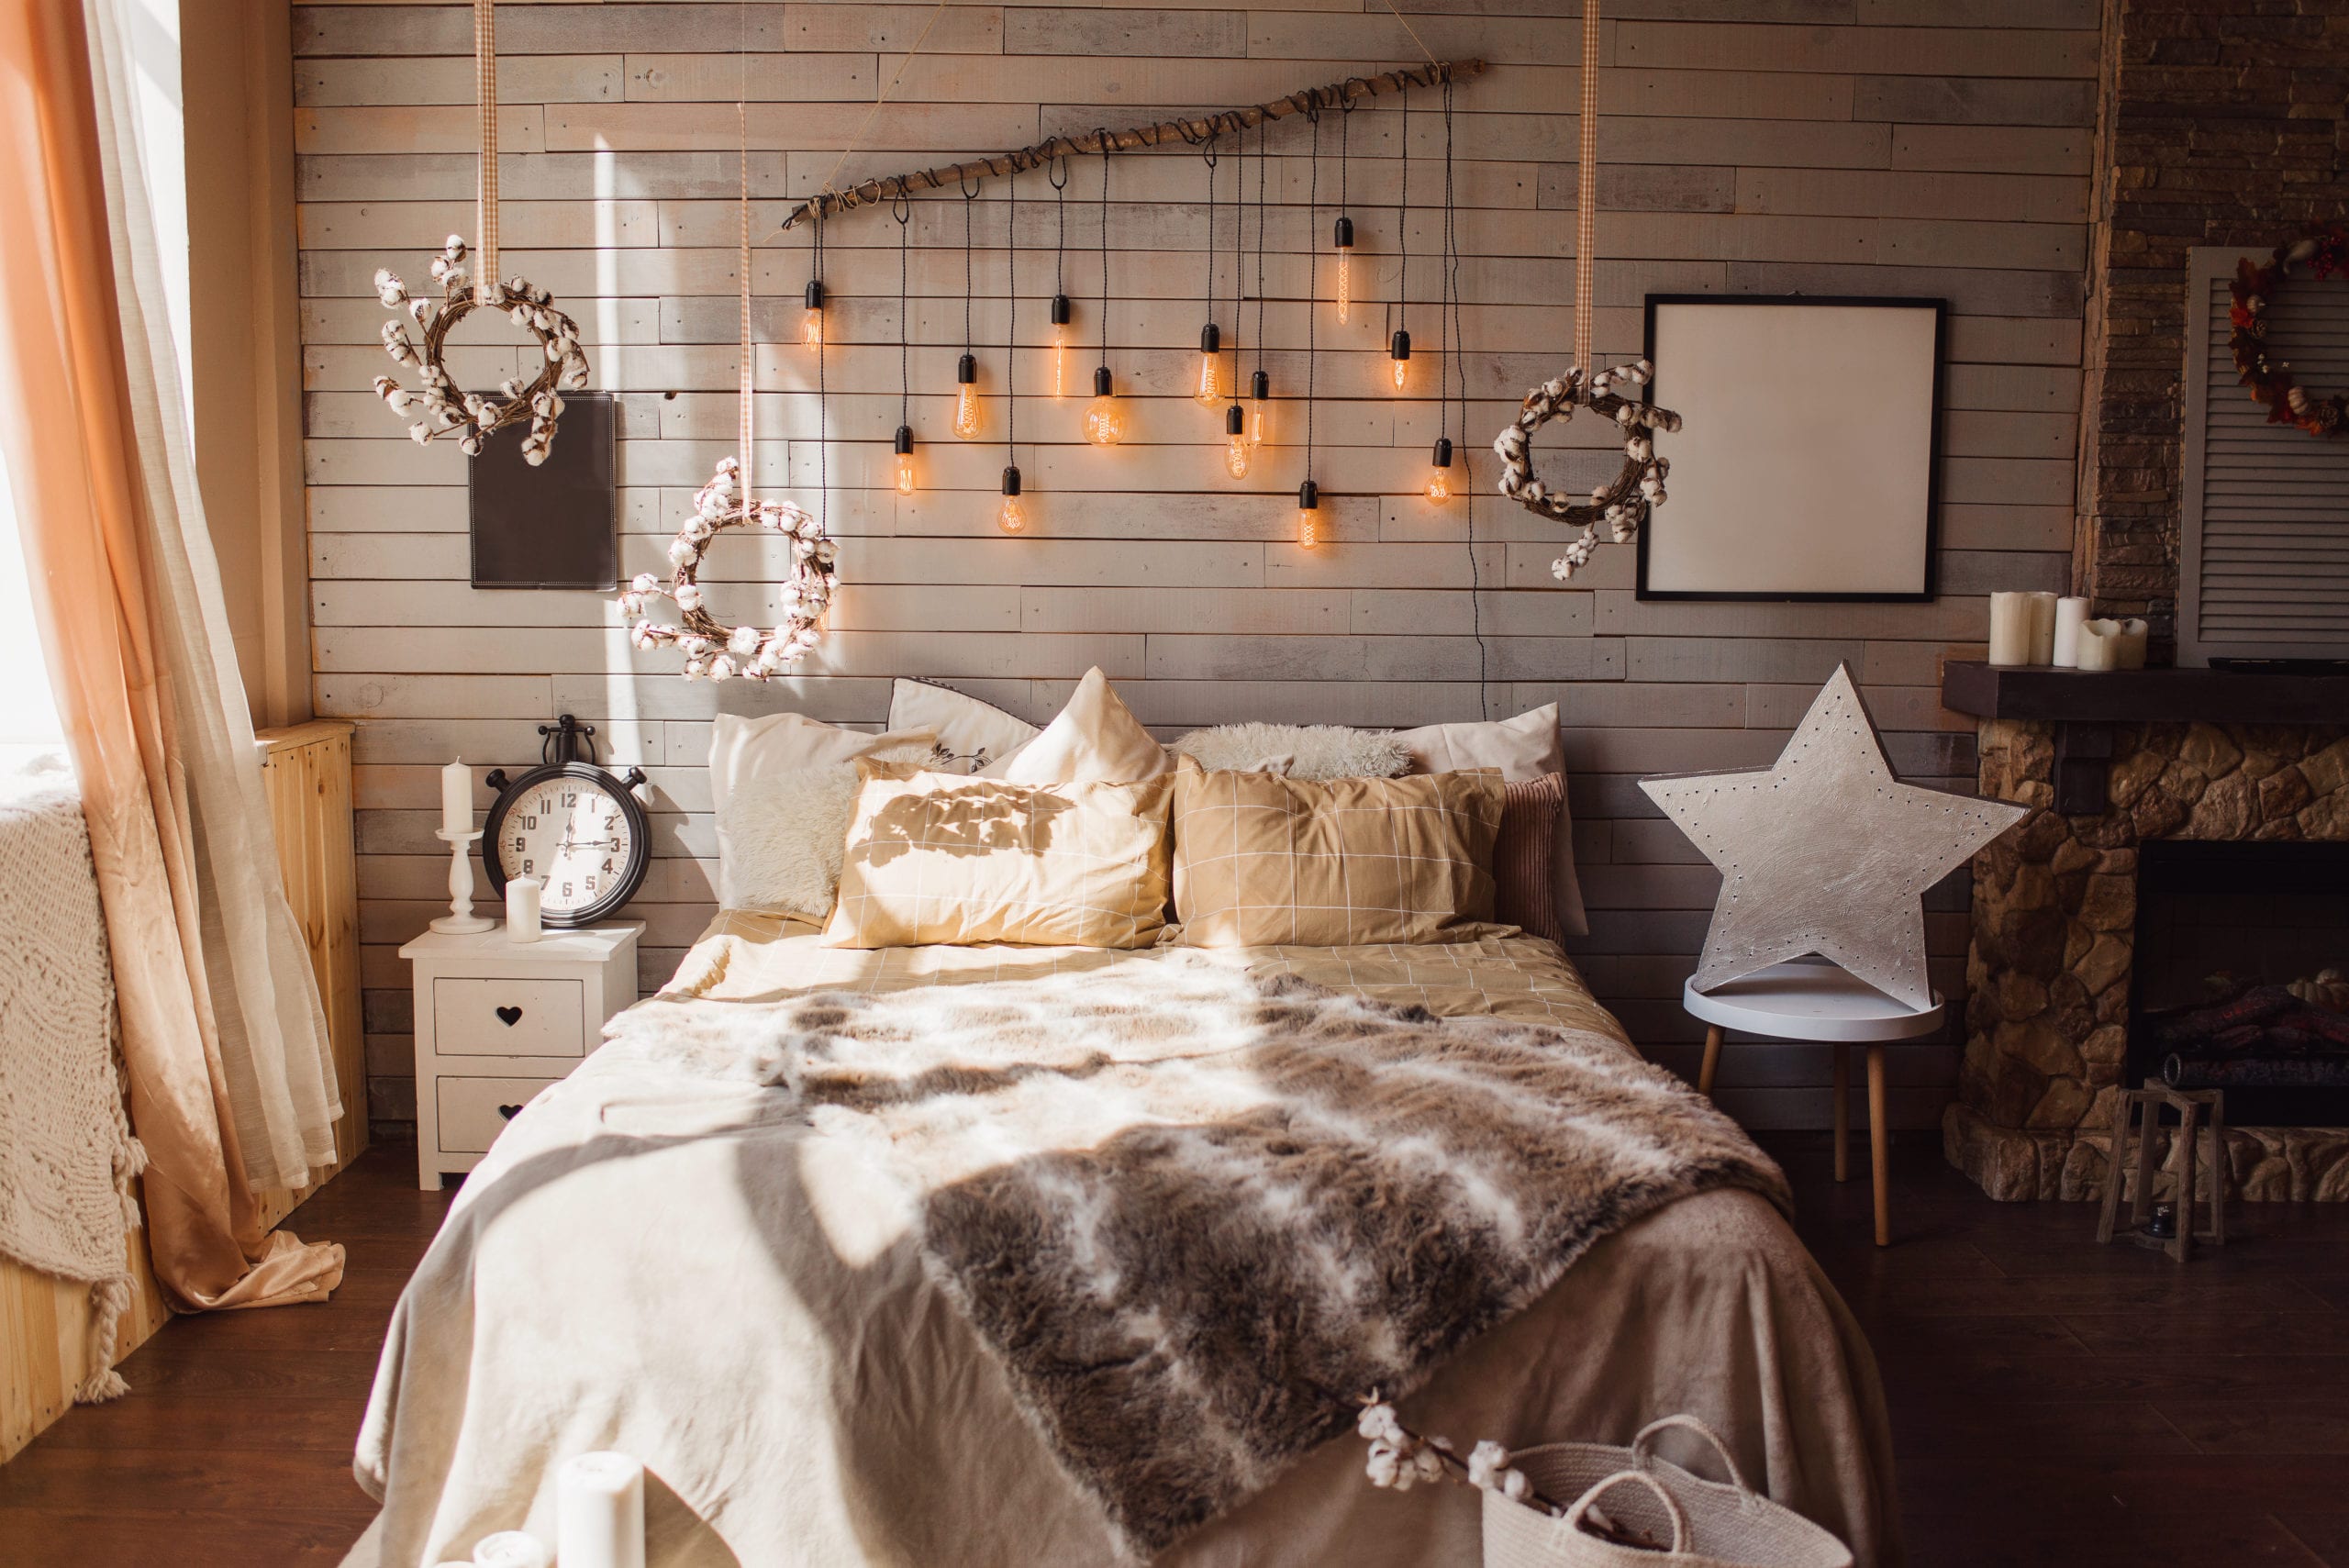 How To Decorate With Cottagecore Decor For The Fall Sunday Edit